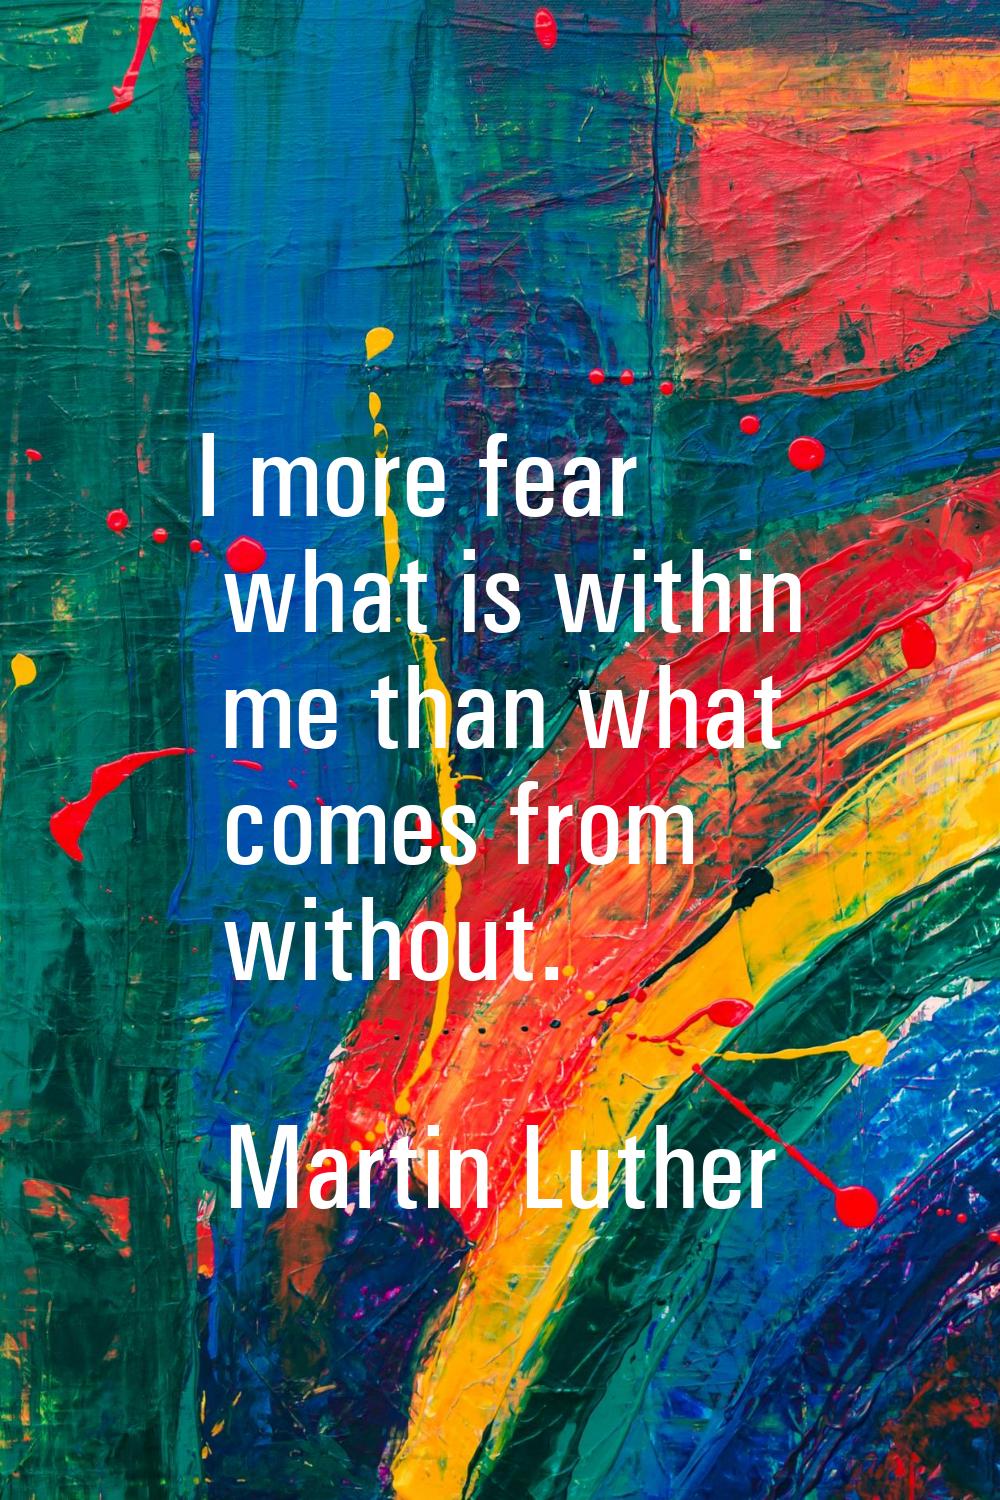 I more fear what is within me than what comes from without.